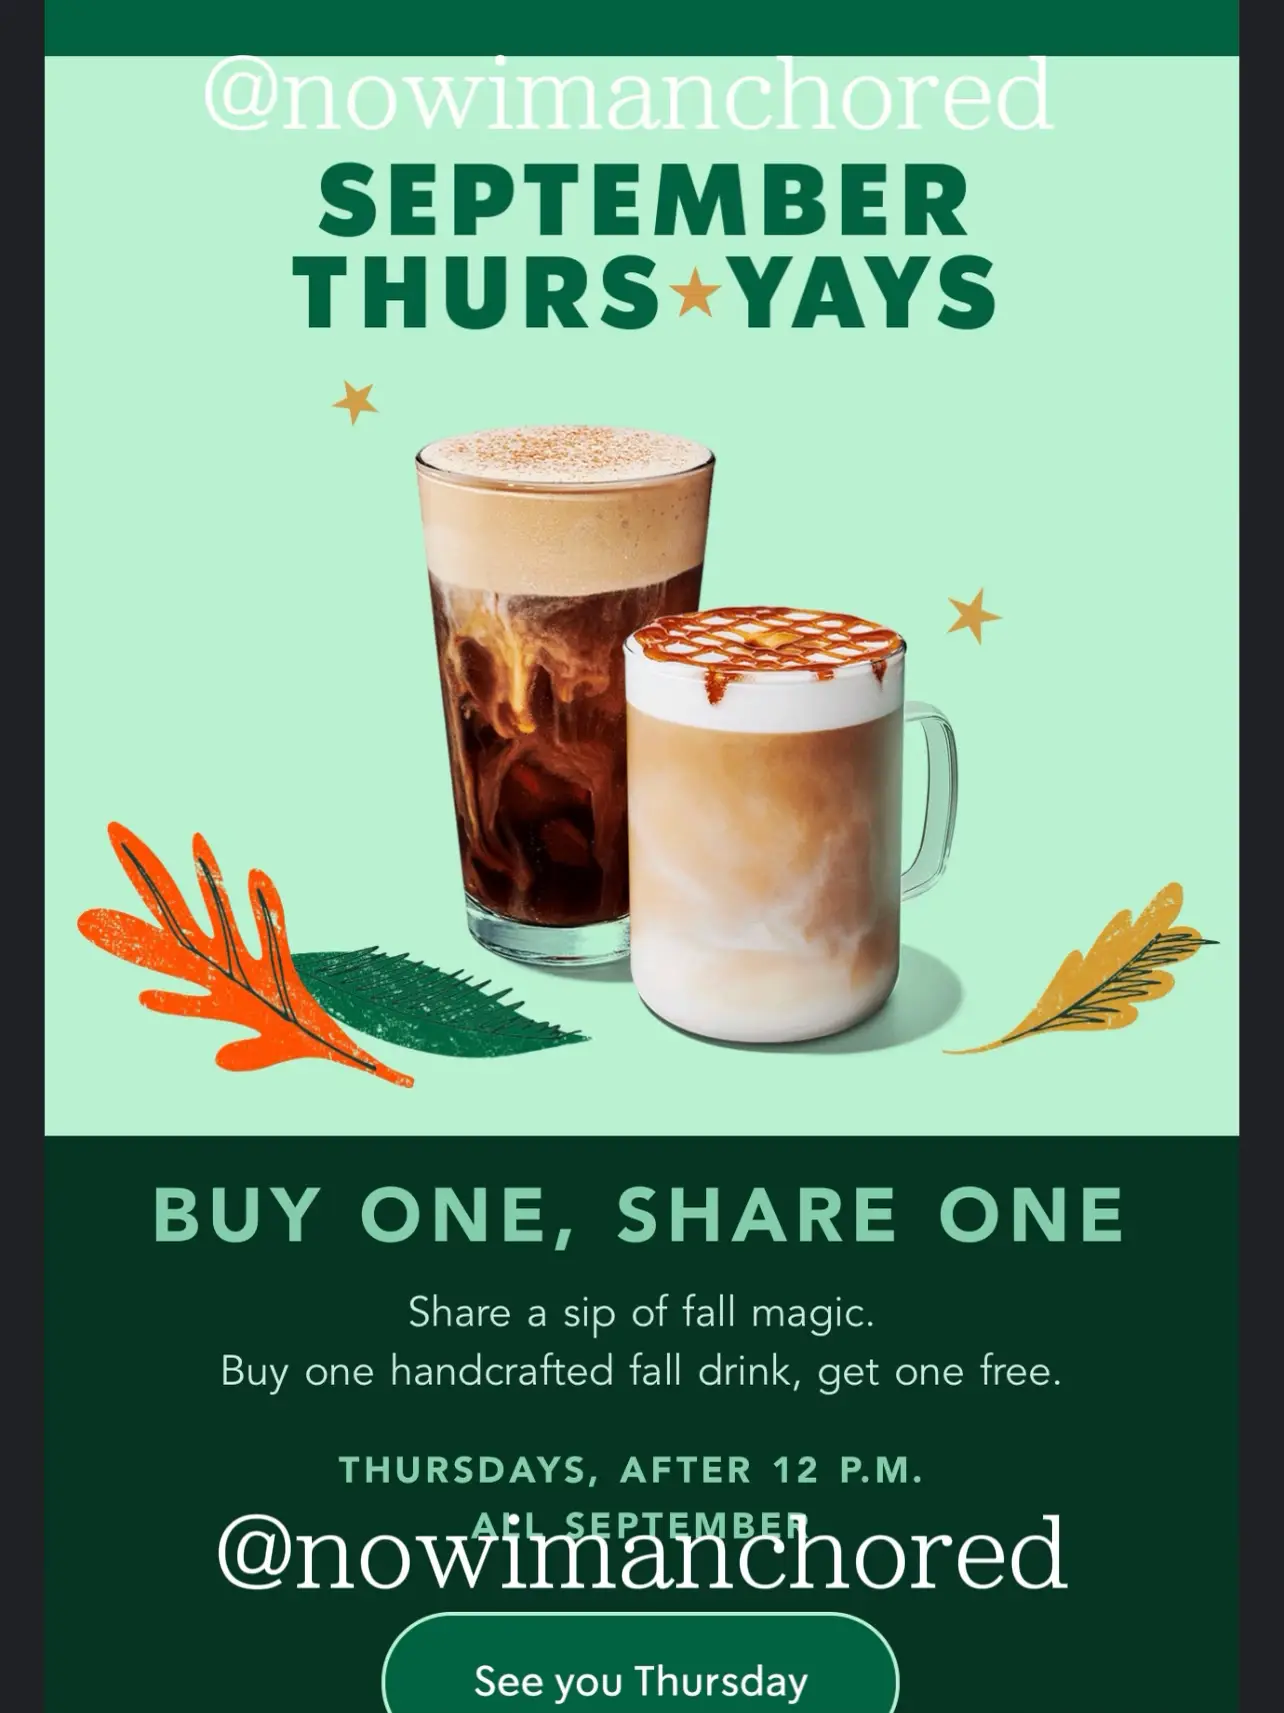 Thursday Starbucks BOGO Handcrafted Fall Drinks Gallery posted by